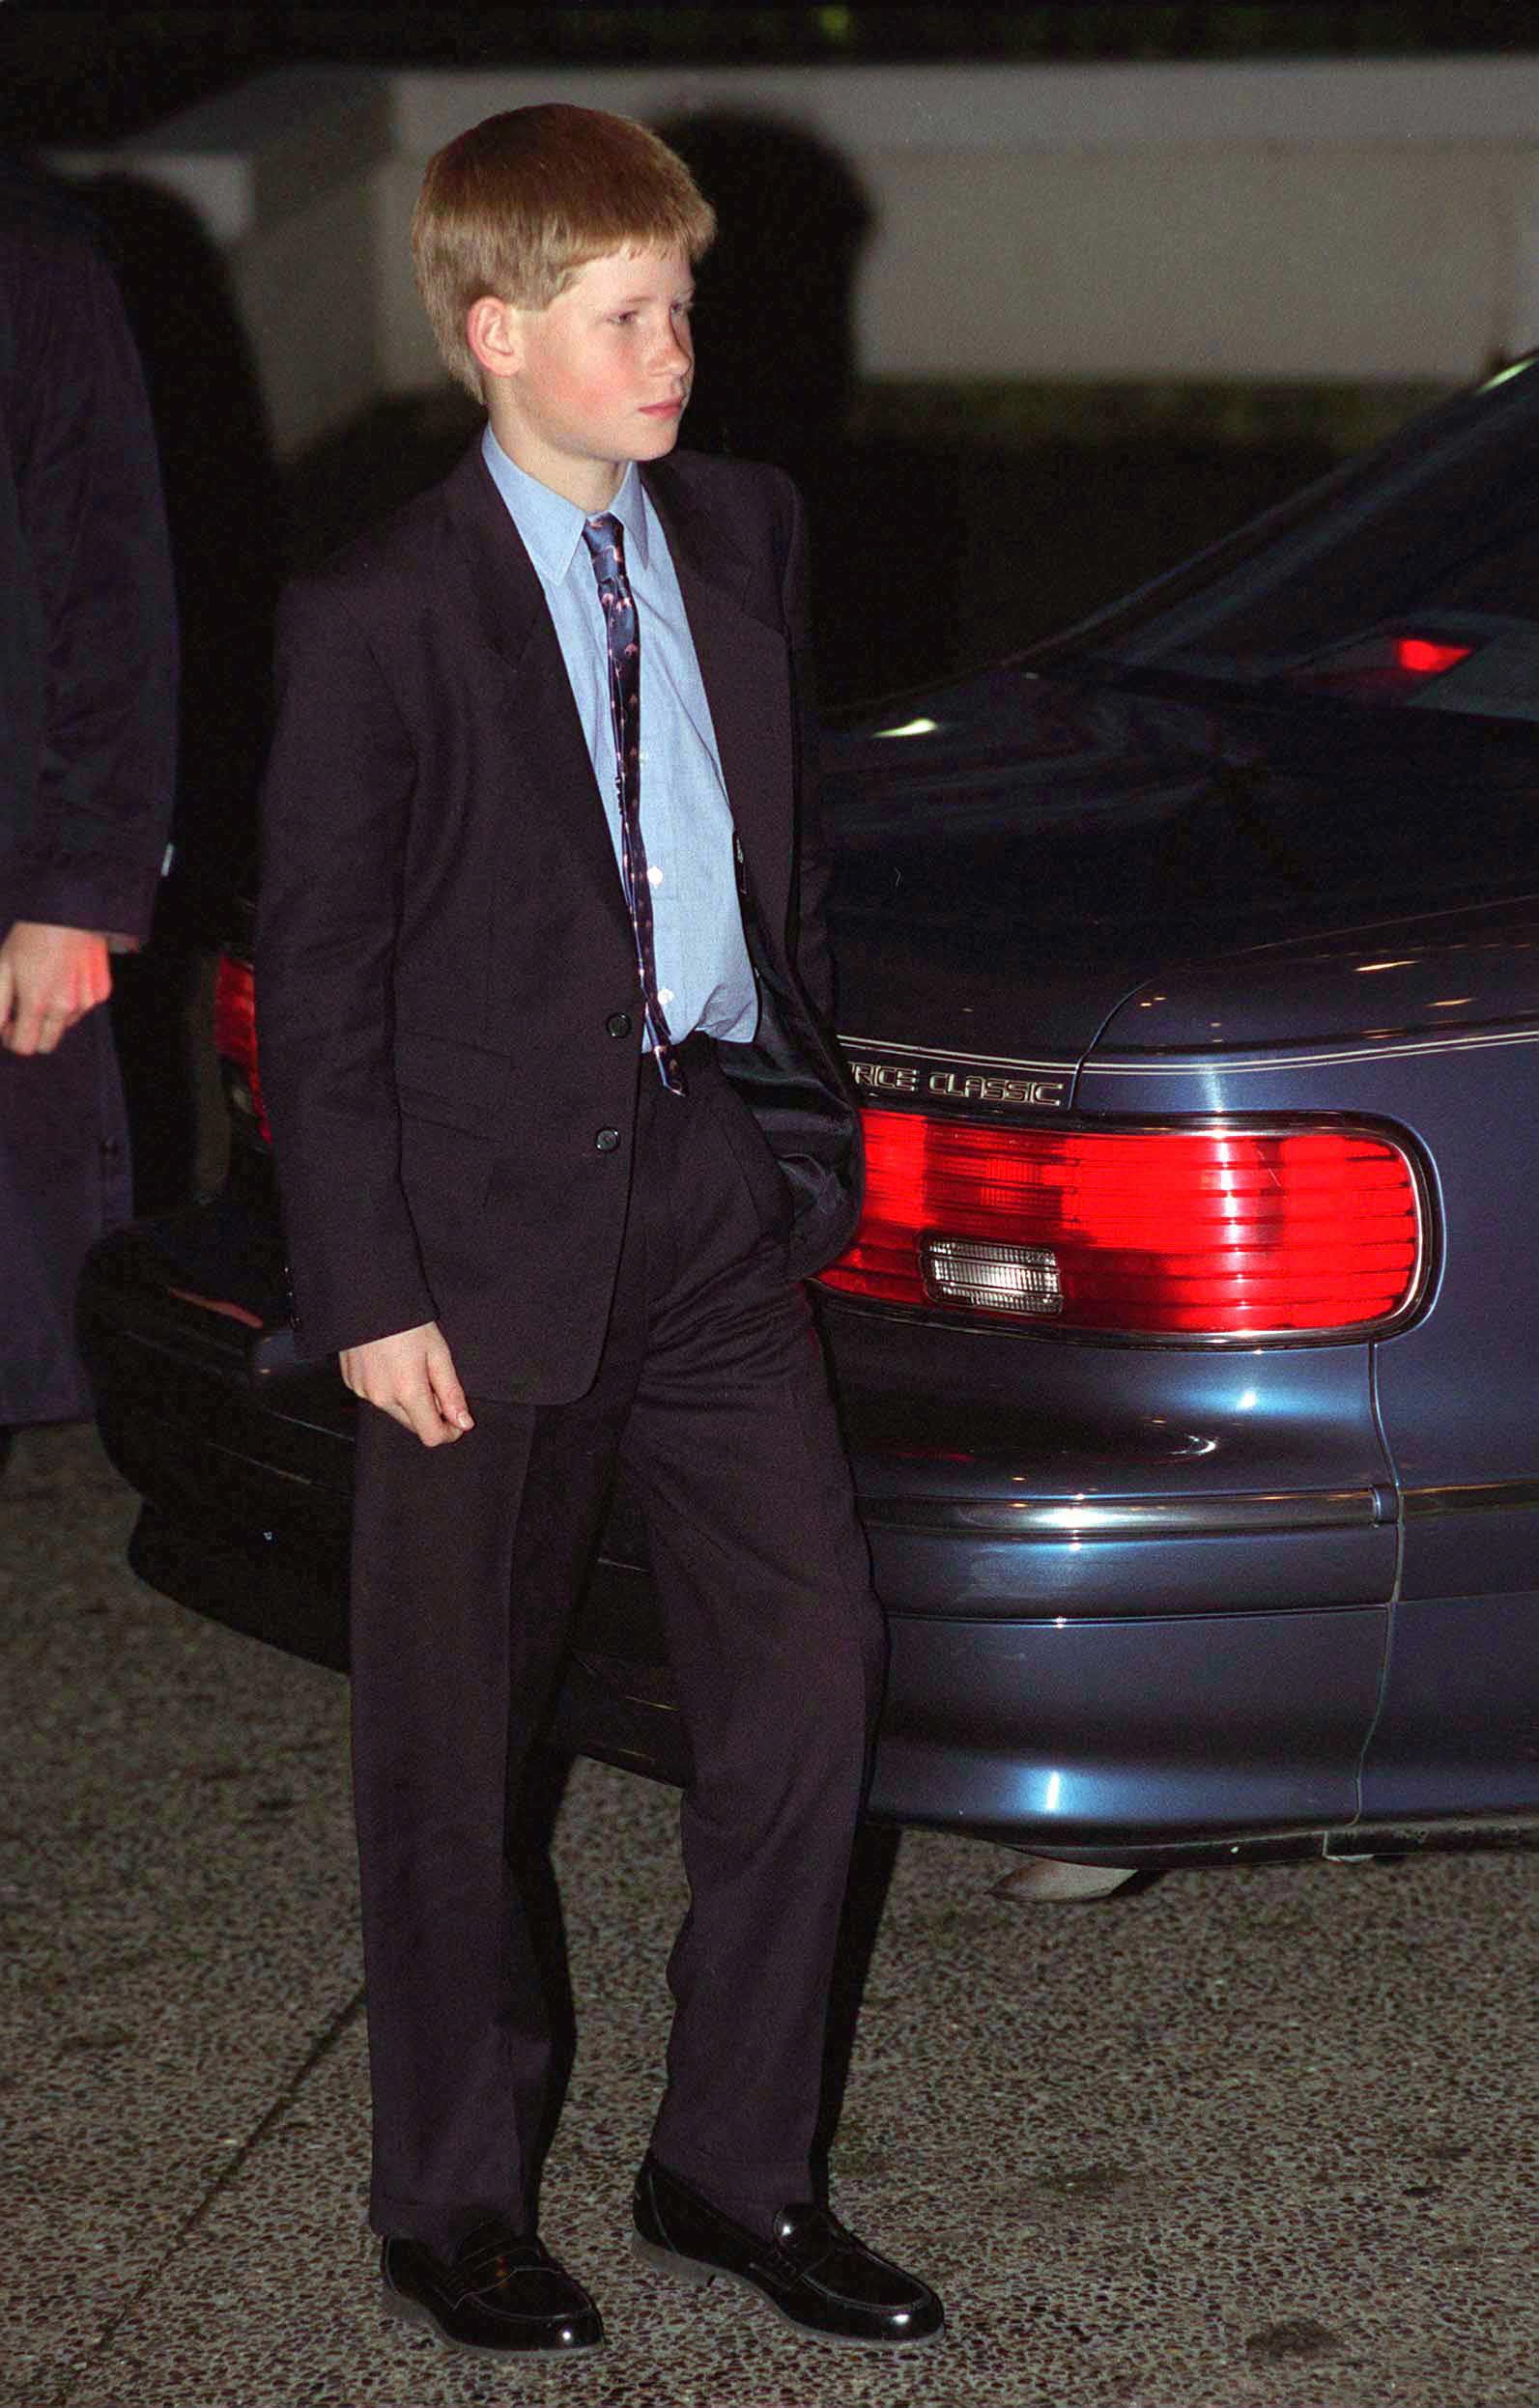  Prince Harry Arriving At The Waterfront Hotel In Vancouver, Canada on March 23, 1998 | Source: Getty Images